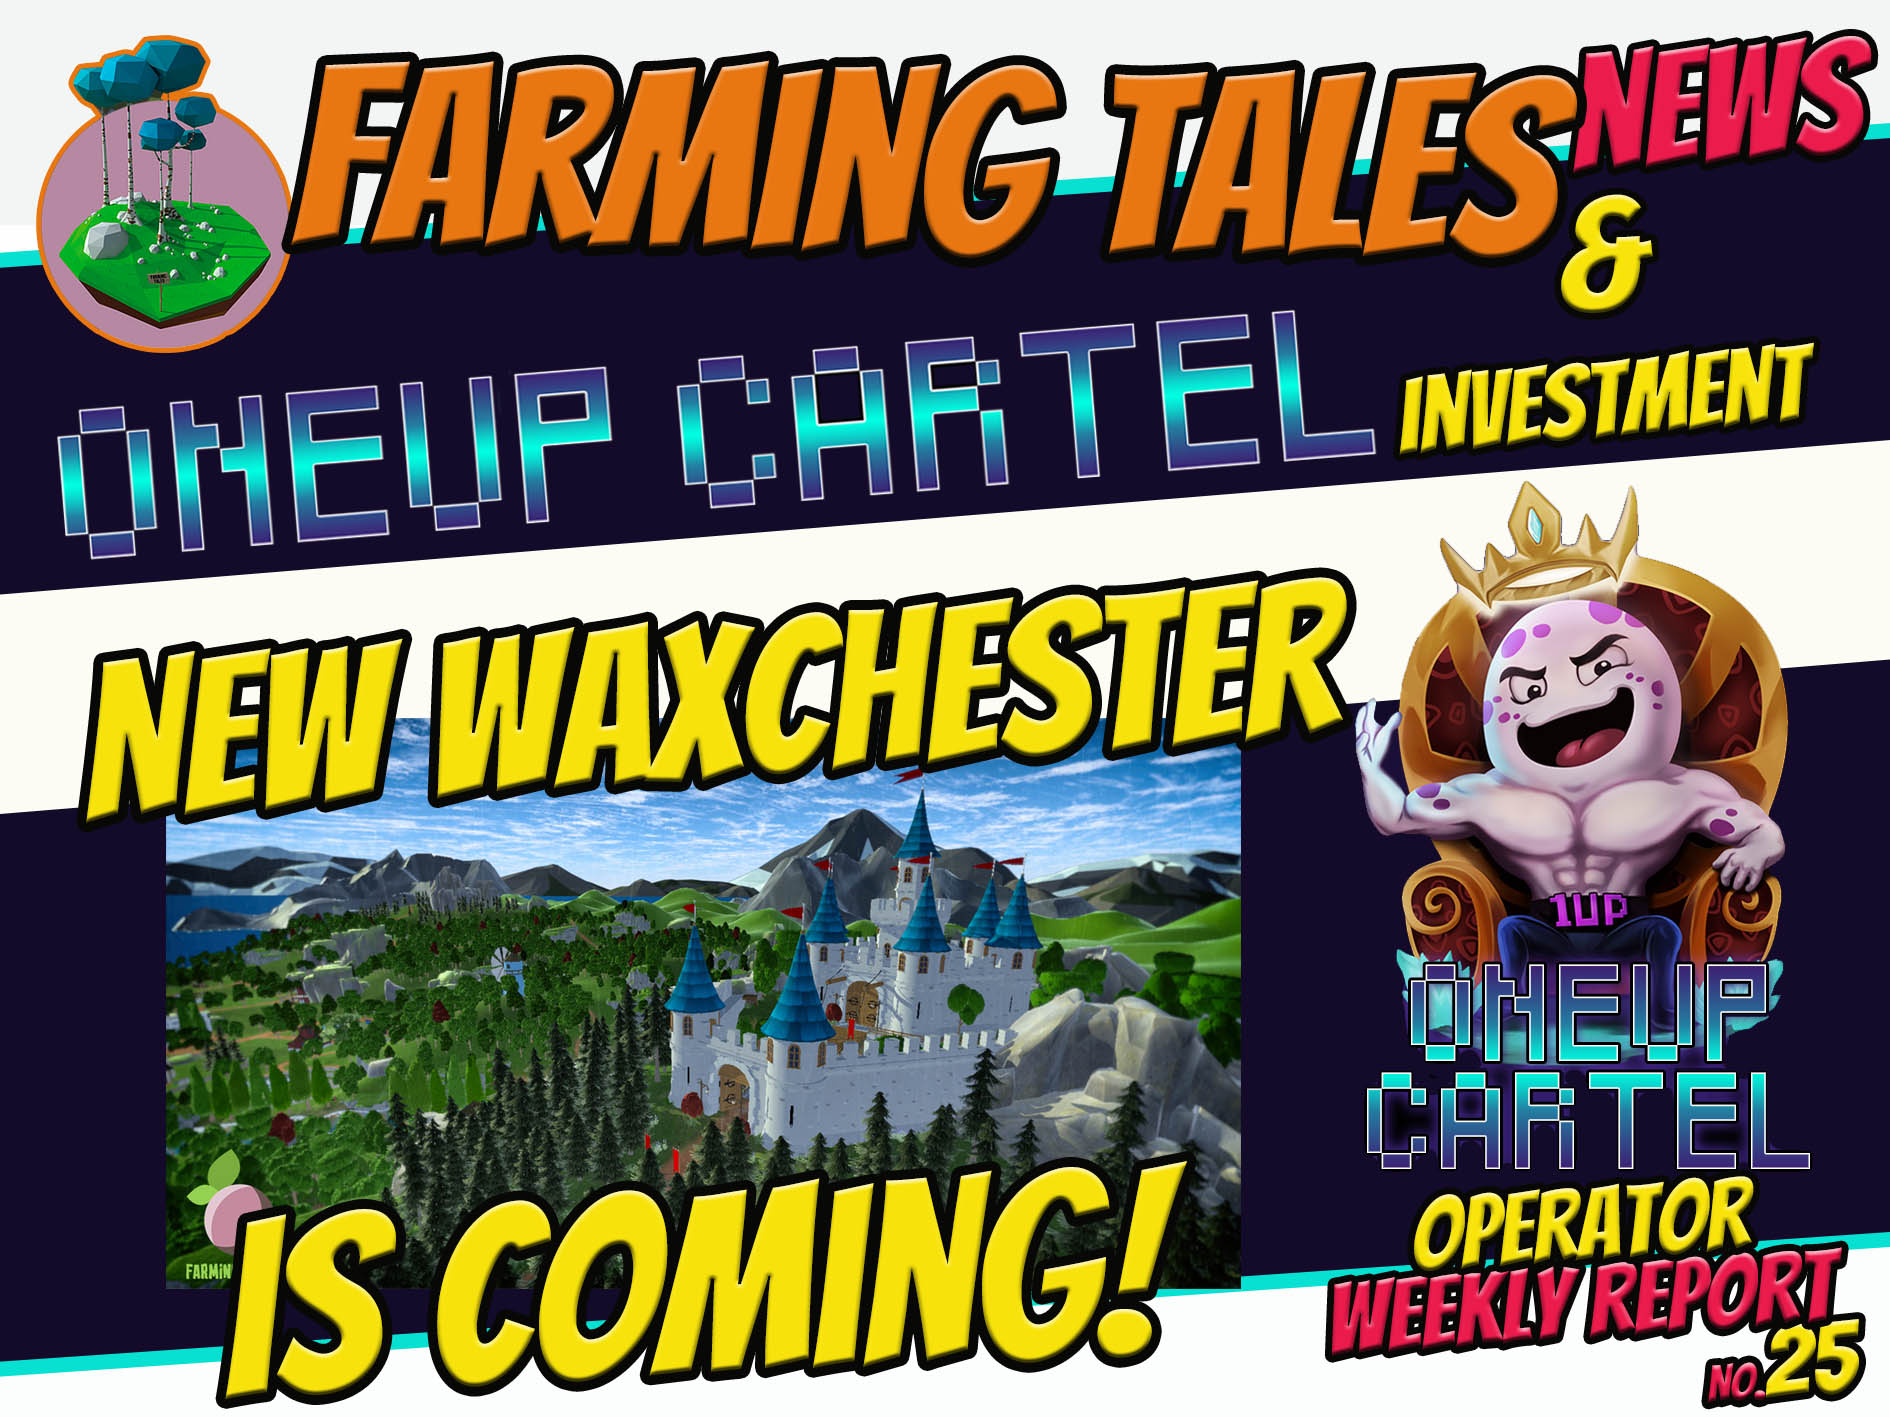 @libertycrypto27/farming-tales-news-new-waxchester-is-coming-and-sest-and-cbit-tokens-fly--oneup-cartel-investment-financial-report-no25-eng